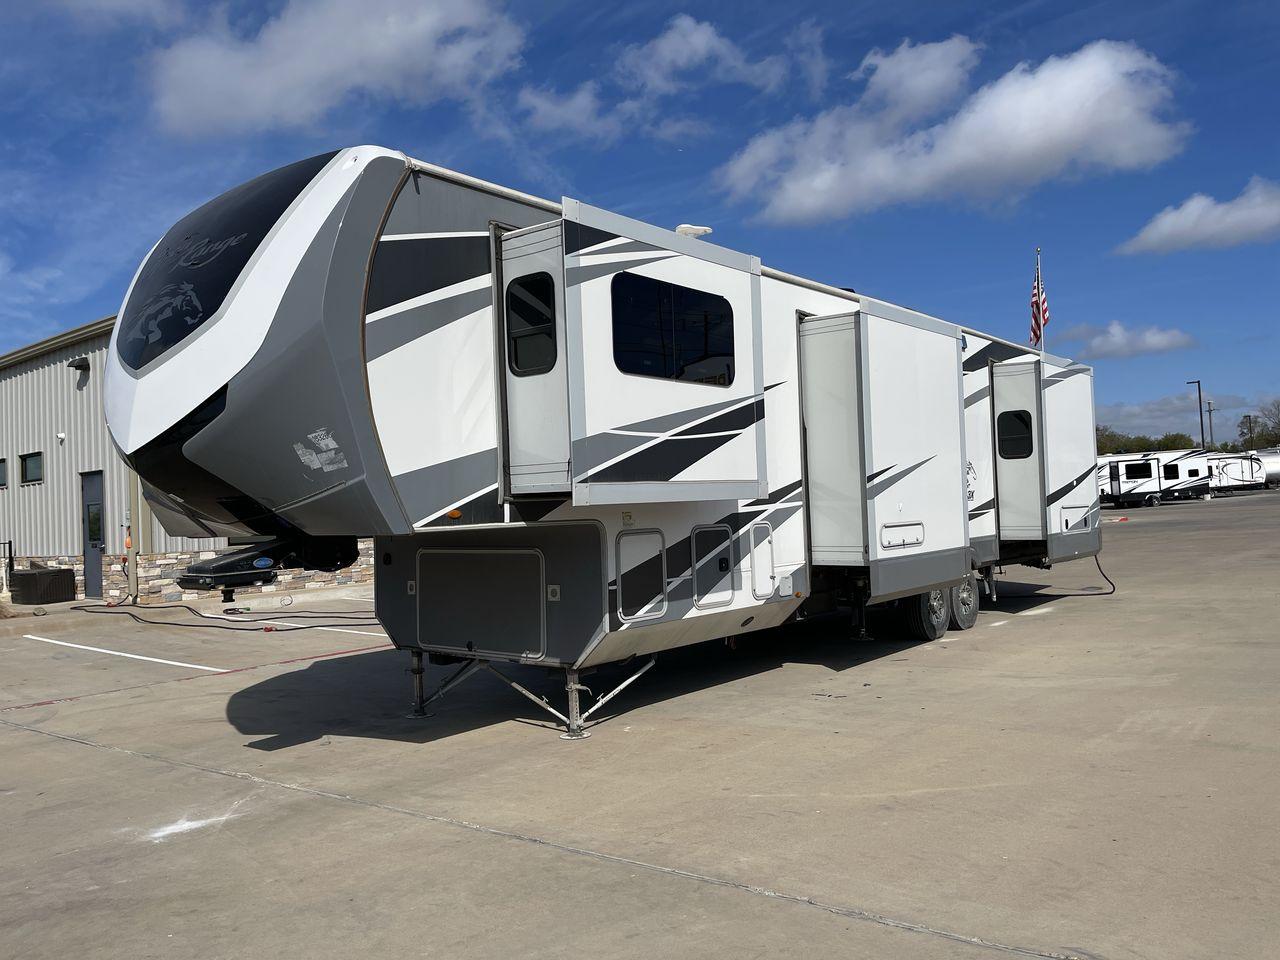 2018 HIGHLAND RIDGE OPEN RANGE 3X387RBS (58TCH0BVXJ3) , Length: 41.5 ft. | Dry Weight: 13,320 lbs. | Gross Weight: 16,470 lbs. | Slides: 5 transmission, located at 4319 N Main St, Cleburne, TX, 76033, (817) 678-5133, 32.385960, -97.391212 - This impressive model spans 41.5 feet in length and boasts a substantial GVWR of 16,470 lbs, ensuring both durability and stability on the road. Crafted with precision and attention to detail, the Open Range 3X387RBS features a robust aluminum frame and fiberglass sidewalls, promising years of relia - Photo #24